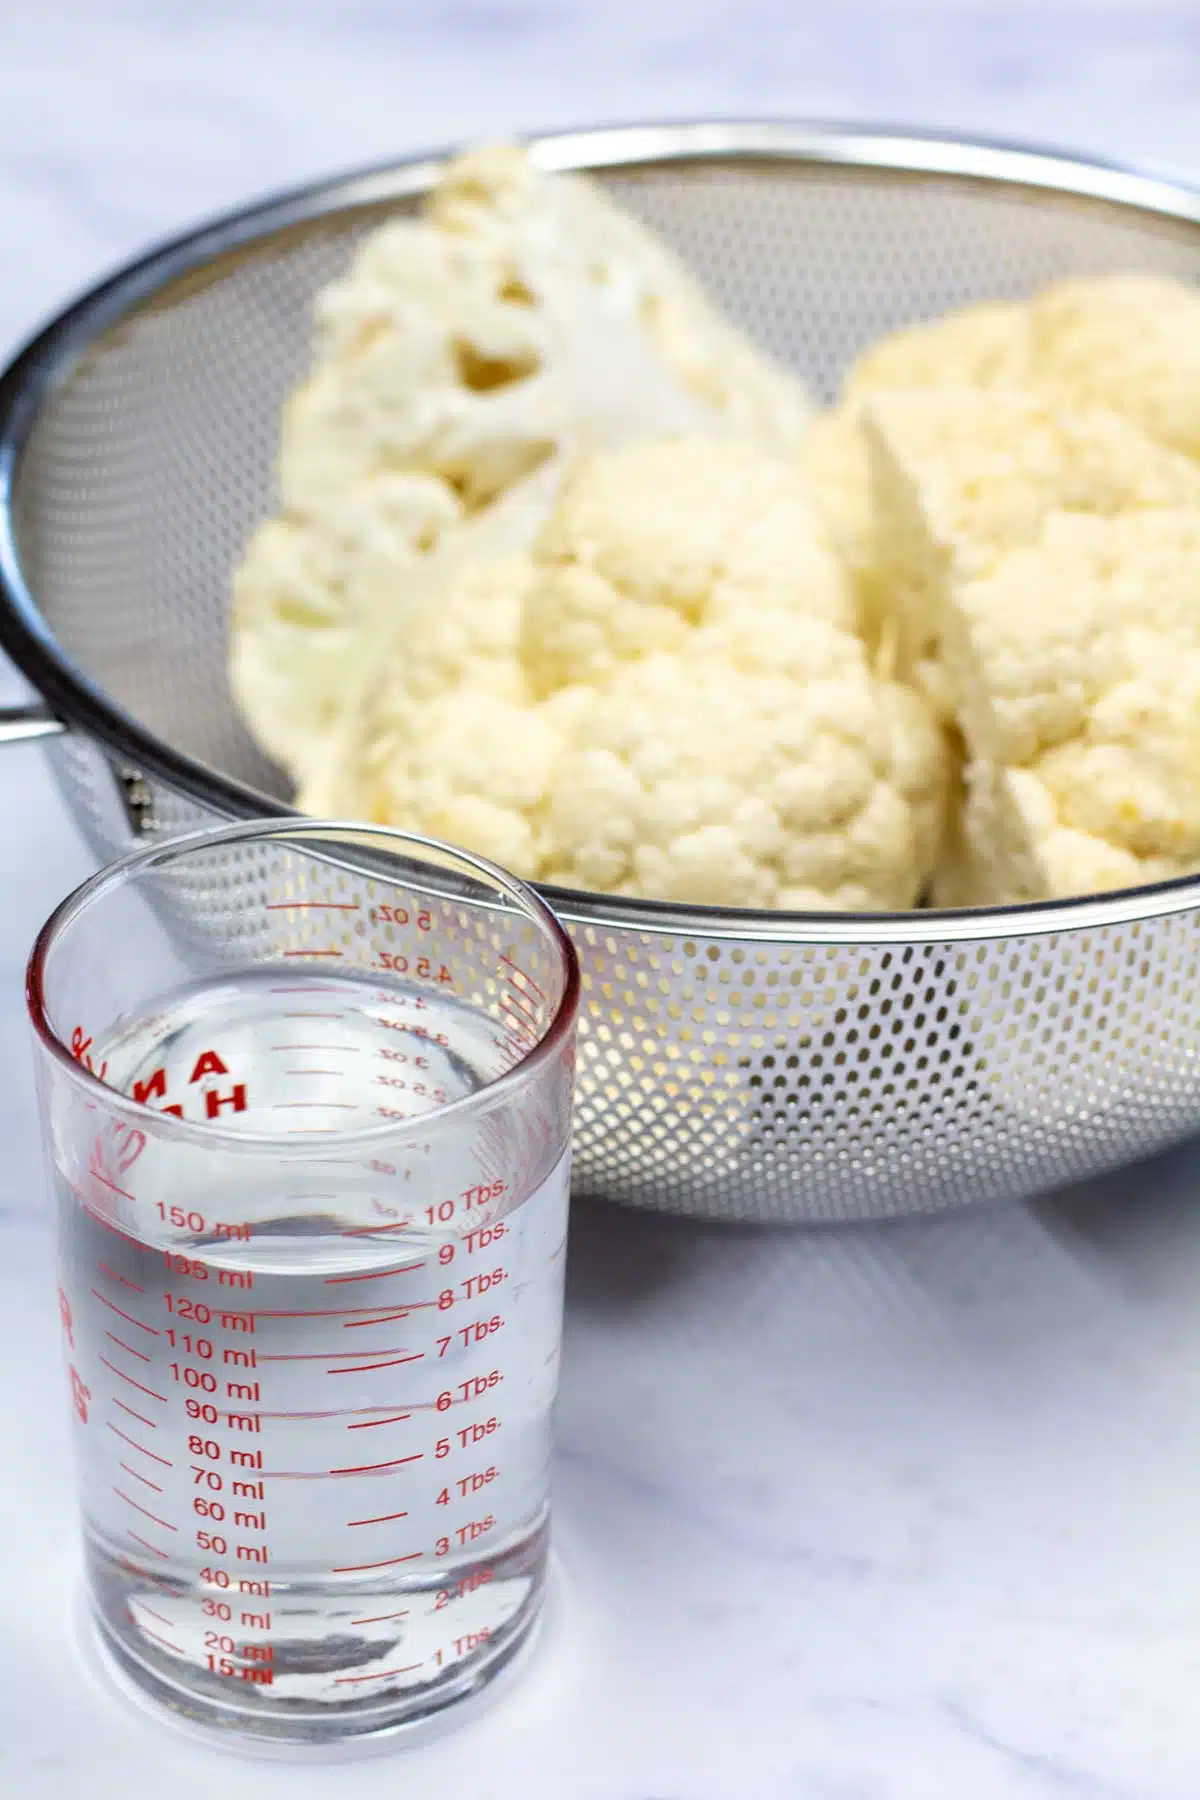 Tall image showing instant pot cauliflower ingredients.